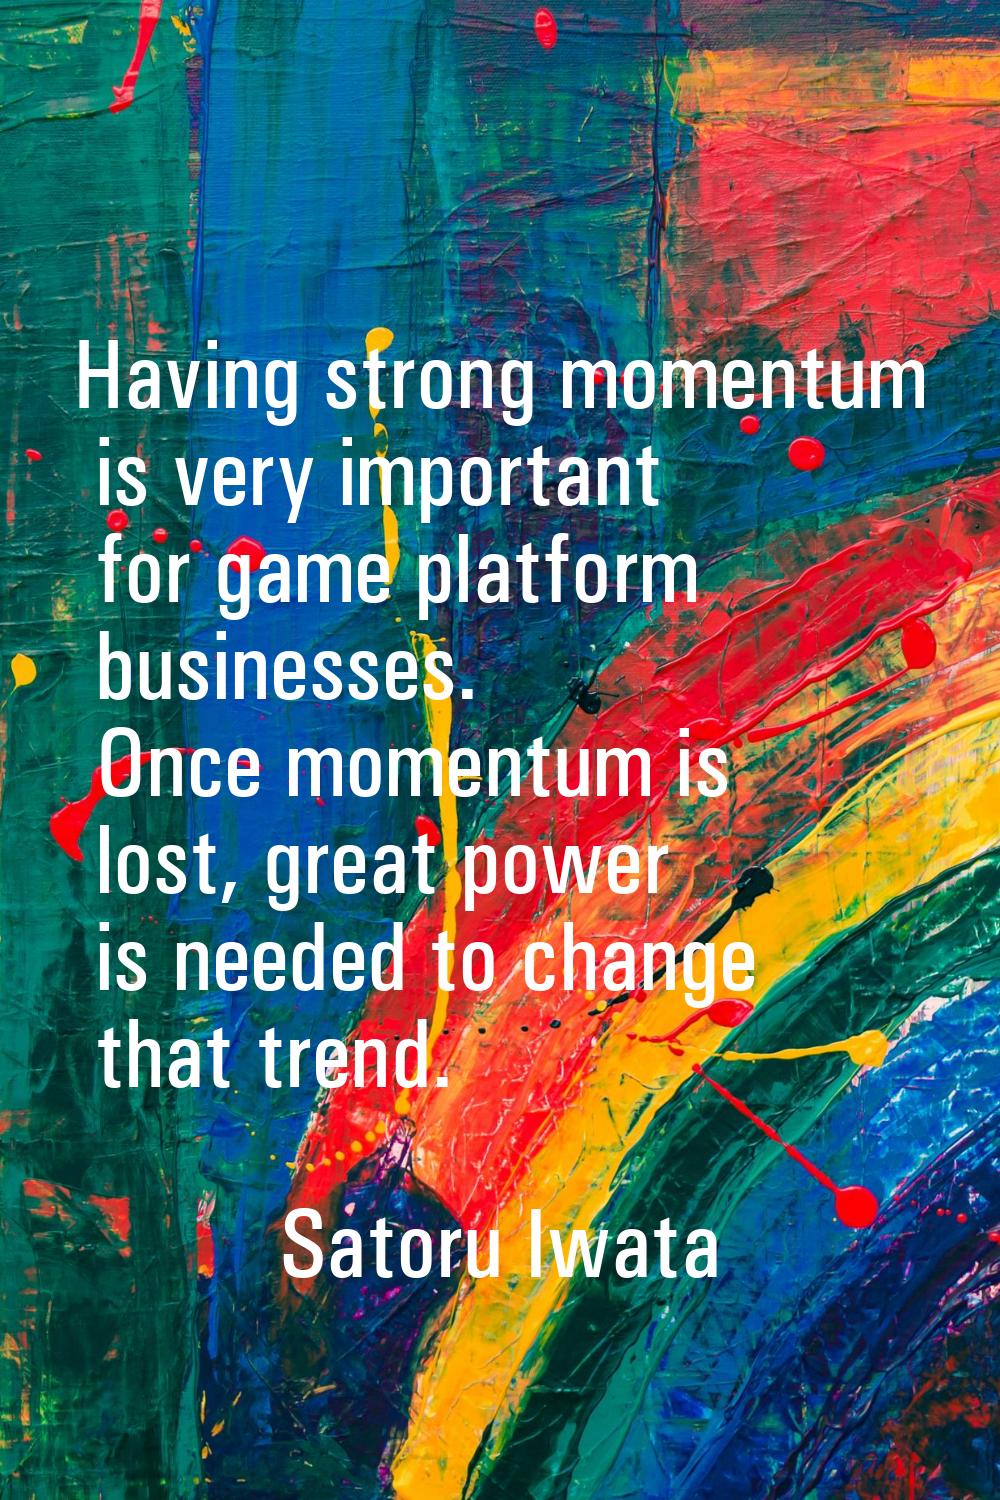 Having strong momentum is very important for game platform businesses. Once momentum is lost, great